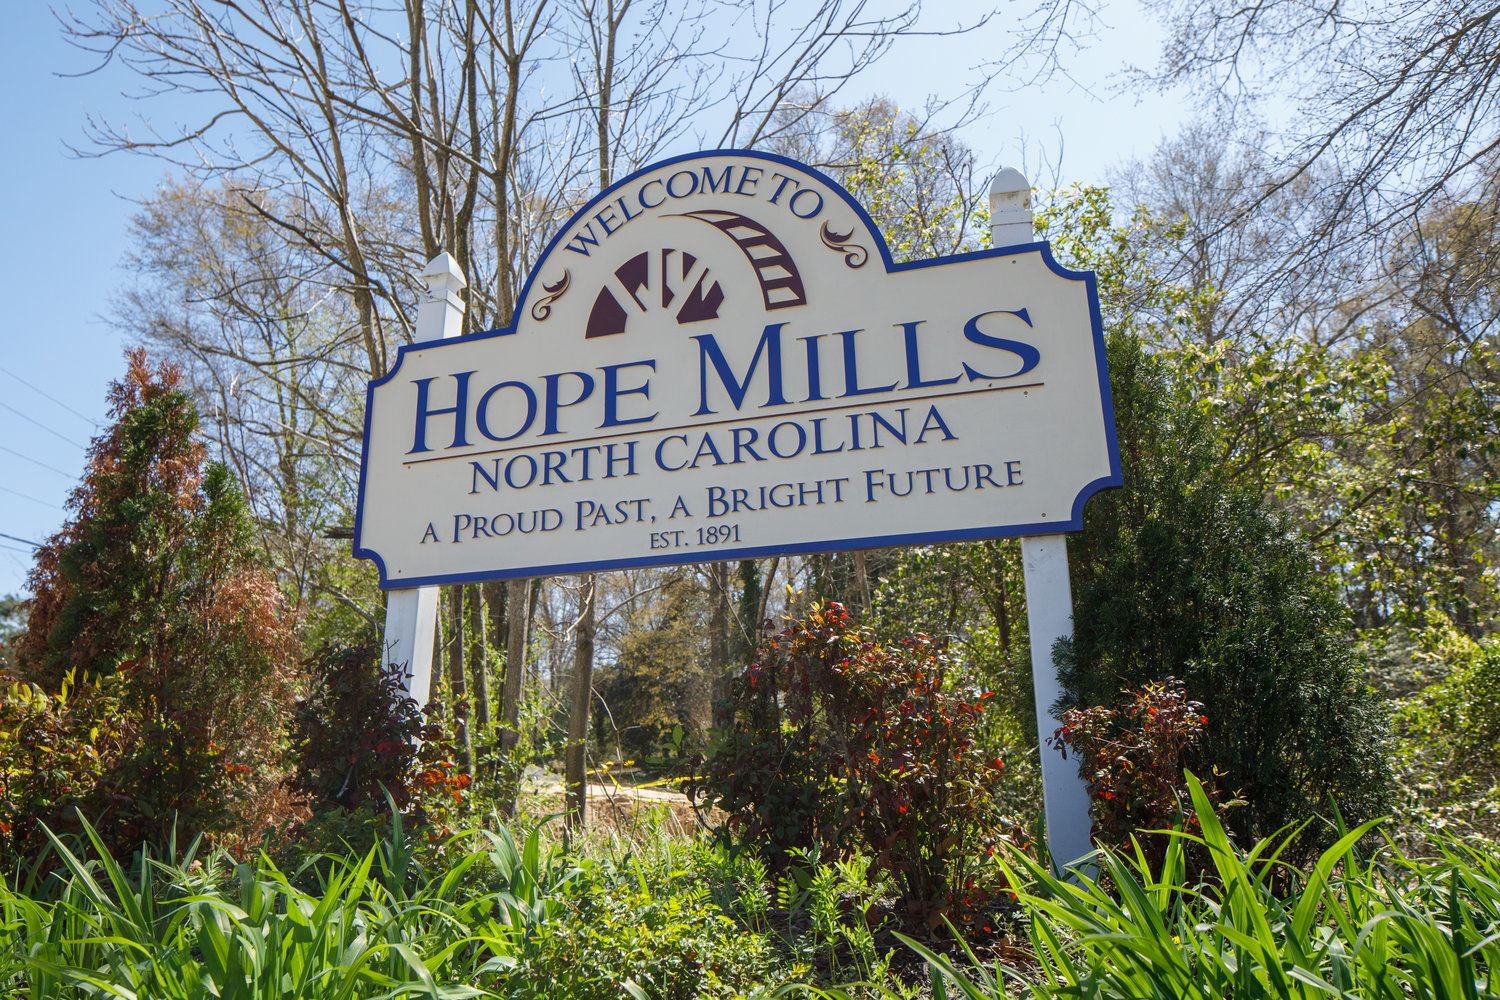 The Hope Mills Board of Commissioners will hear comments on a plan to change elections of town leaders on Monday night